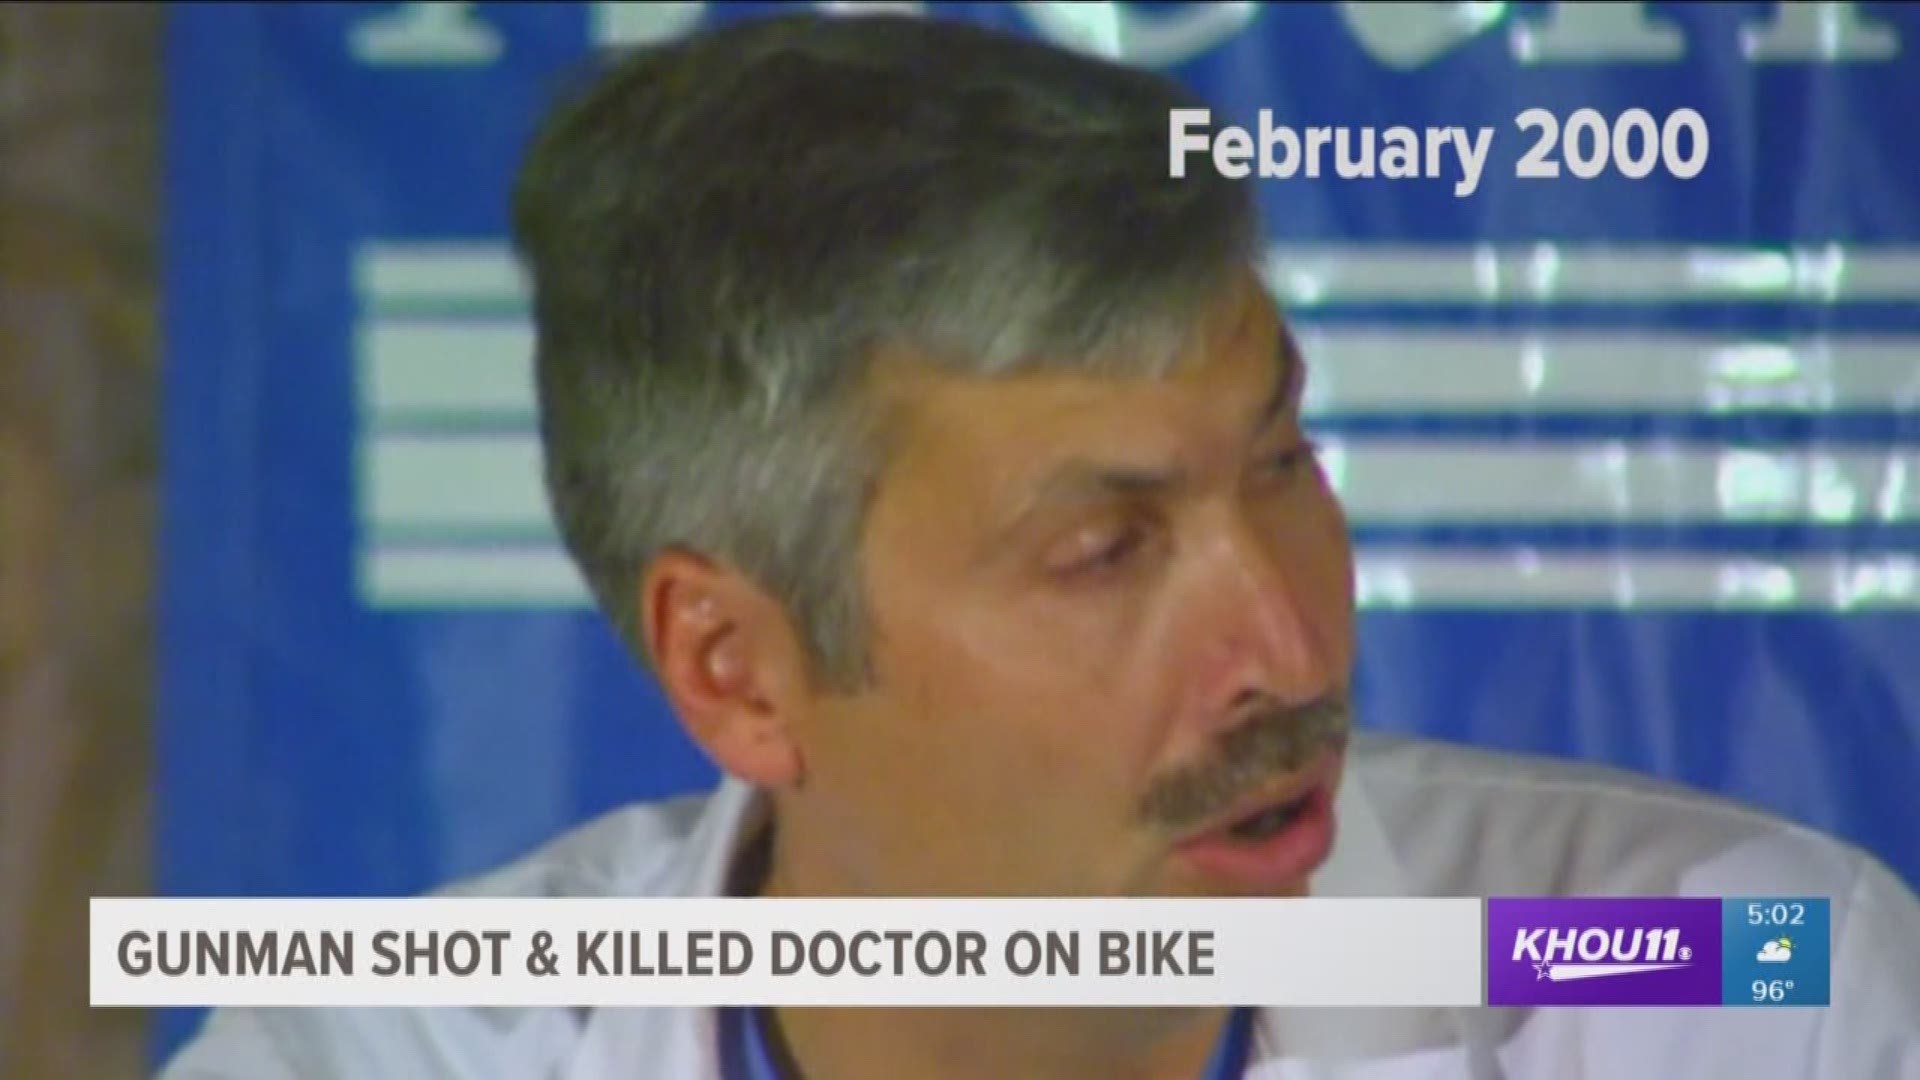 Dr. Mark Hausknecht was shot by another man on a bike Friday morning near Texas Children's Hospital.